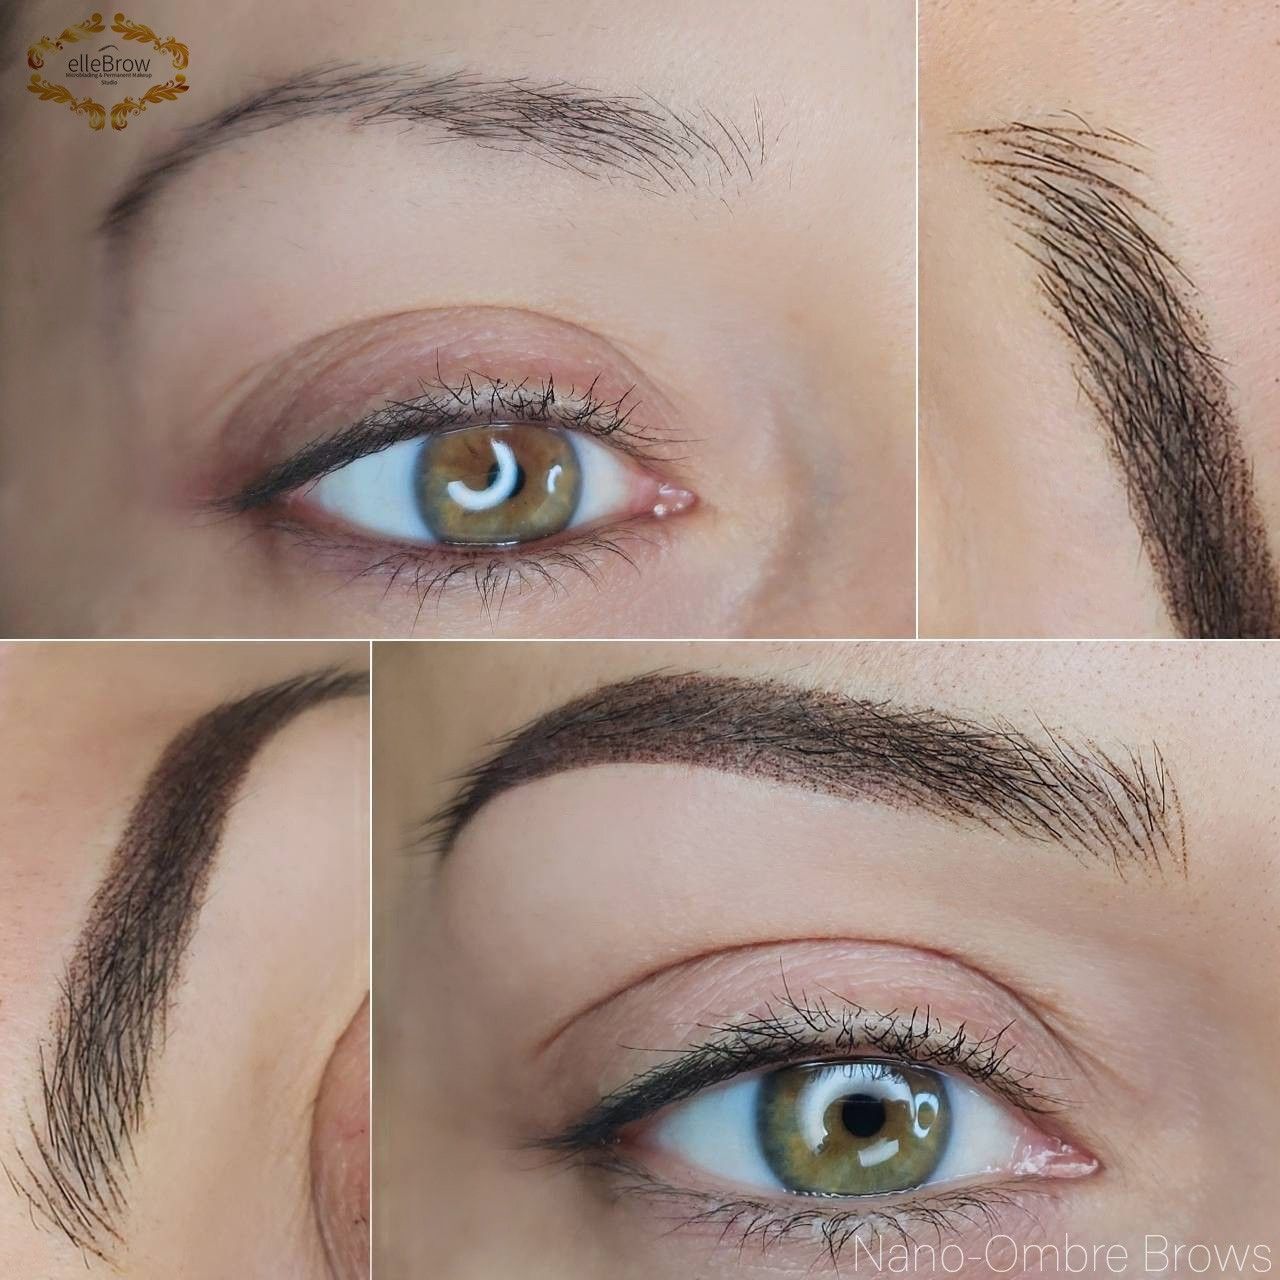 Nano Brows and Ombre combination 
Ellebrow NYC Client